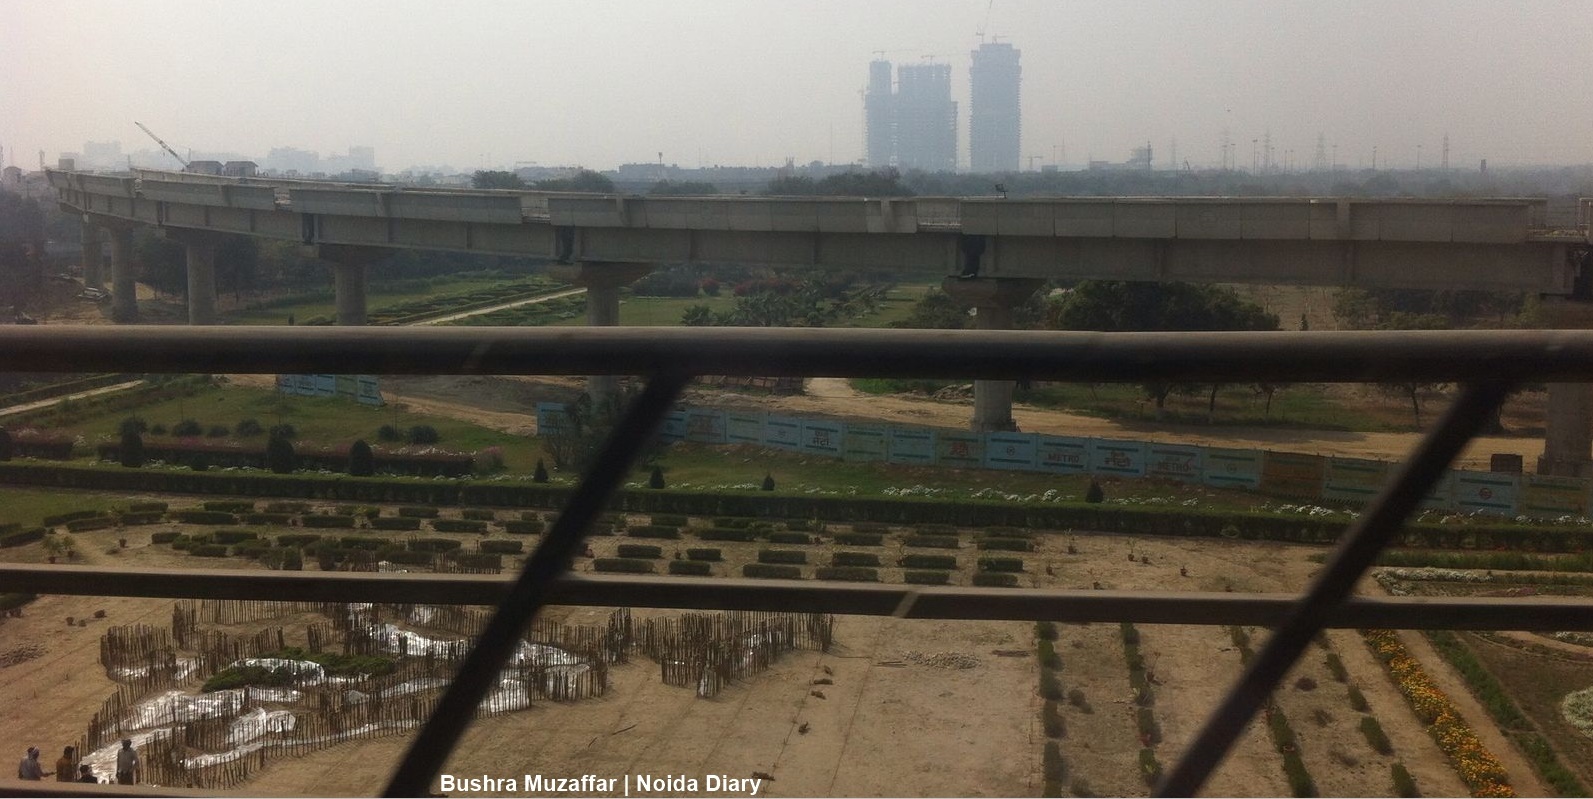 Infragrowth on a High Yet Law and Order a Concern in Noida